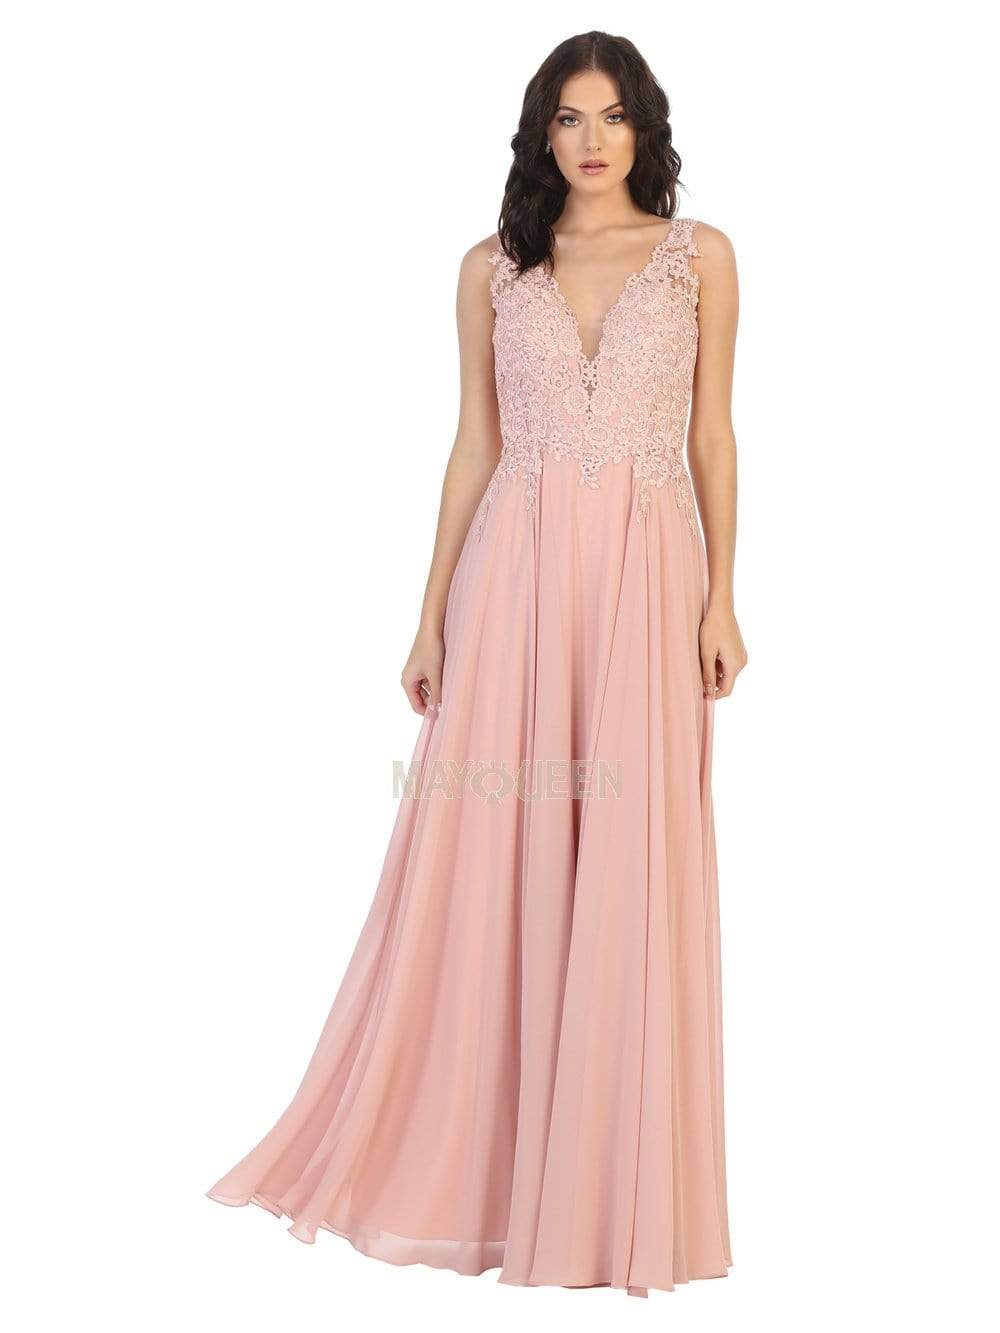 May Queen - MQ1754 Embroidered Deep V-neck A-line Dress Prom Dresses 4 / Dusty-Rose